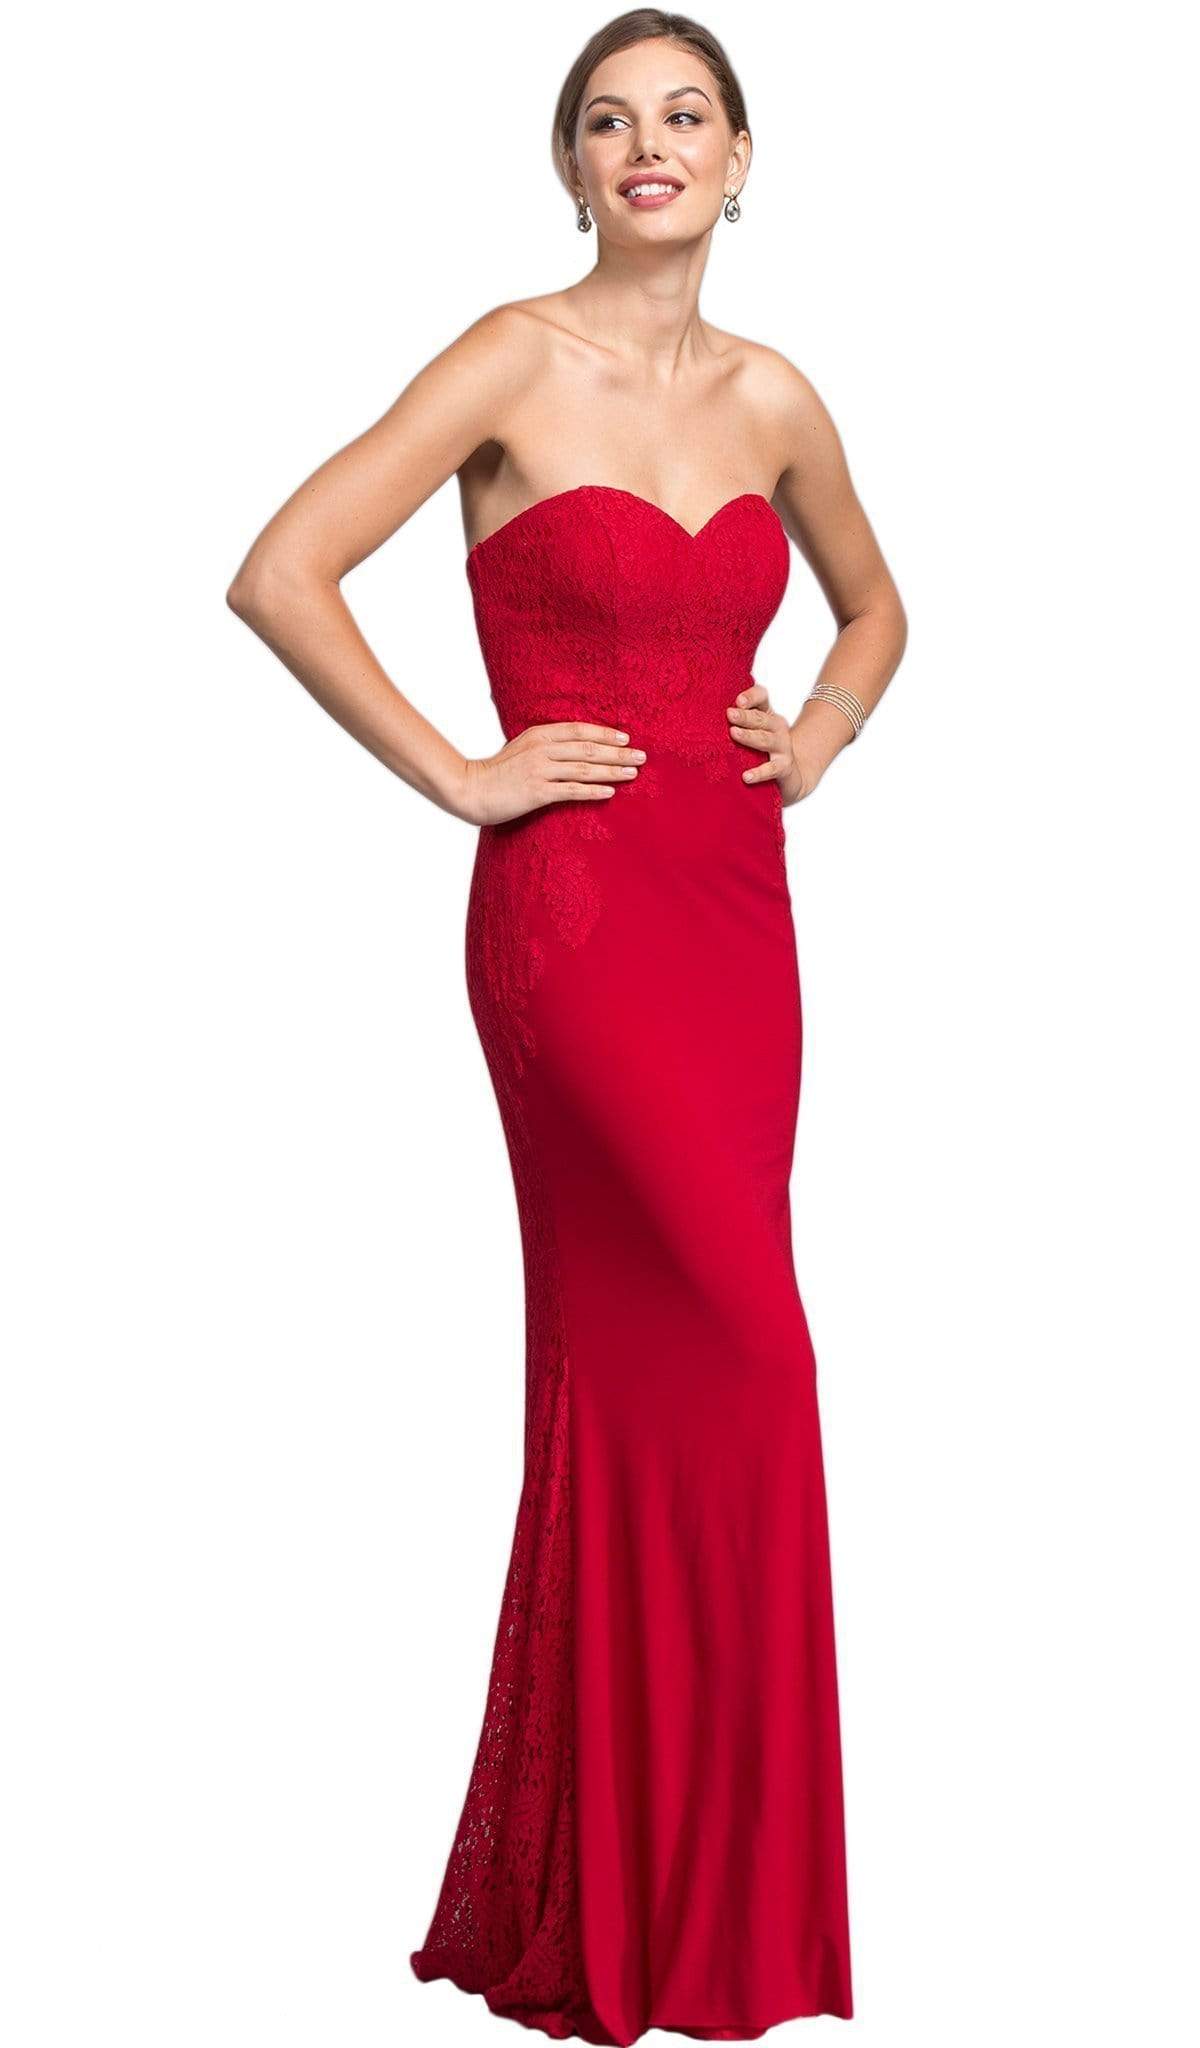 Aspeed Design - Lace Strapless Sweetheart Prom Dress
